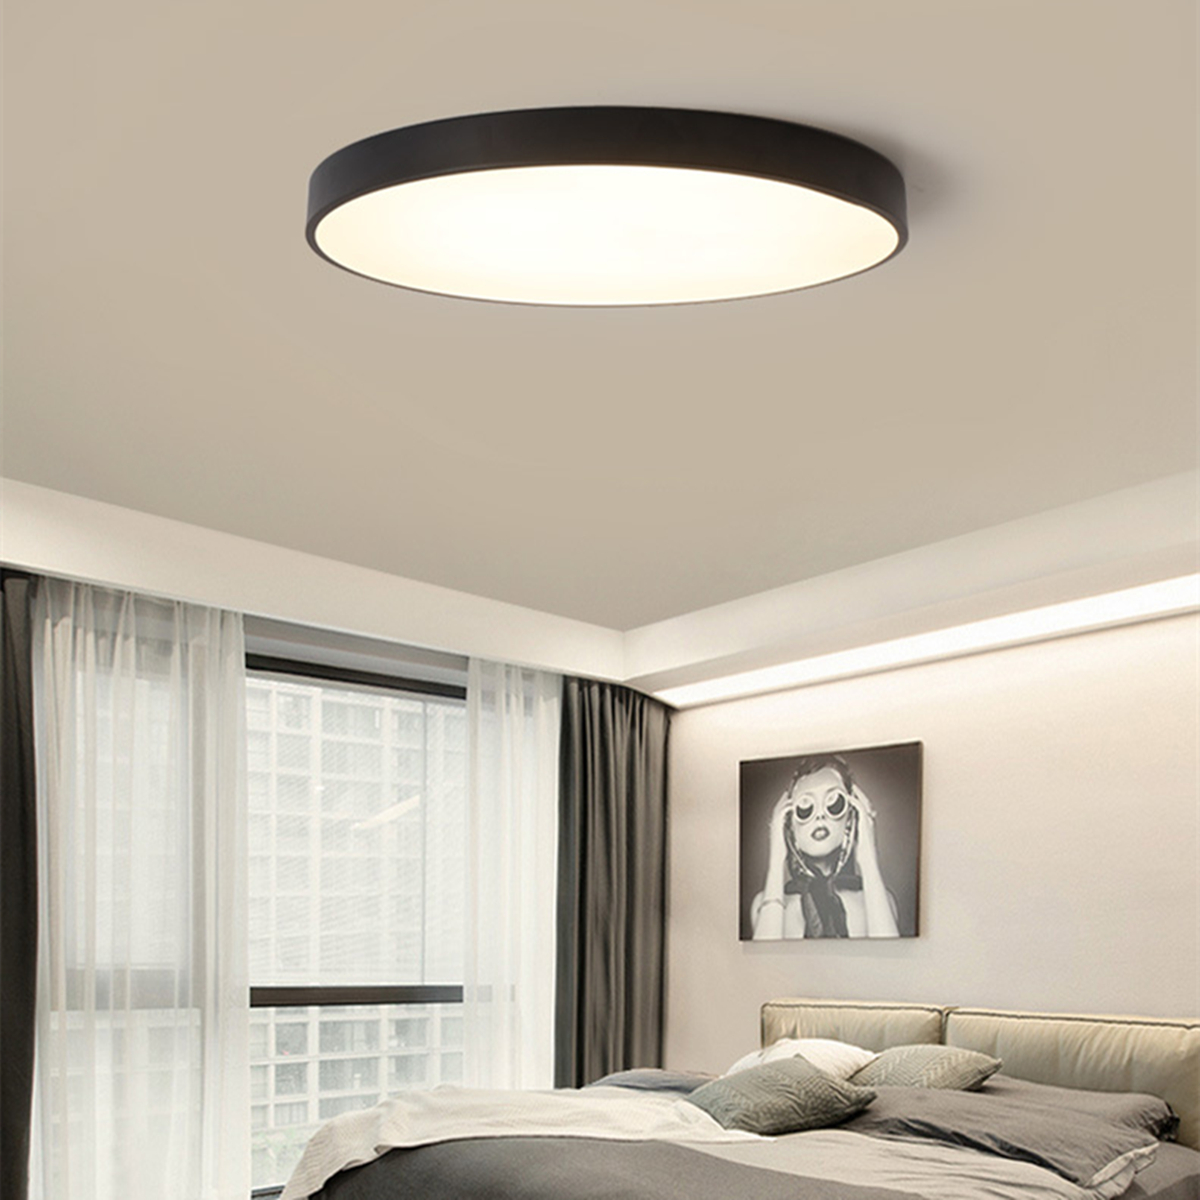 AC220V-18W-Dimming-LED-Ceiling-Down-Light-Remote-Control-Bedroom-Lamp-Living-Room-Mount-Fixture-1709815-2